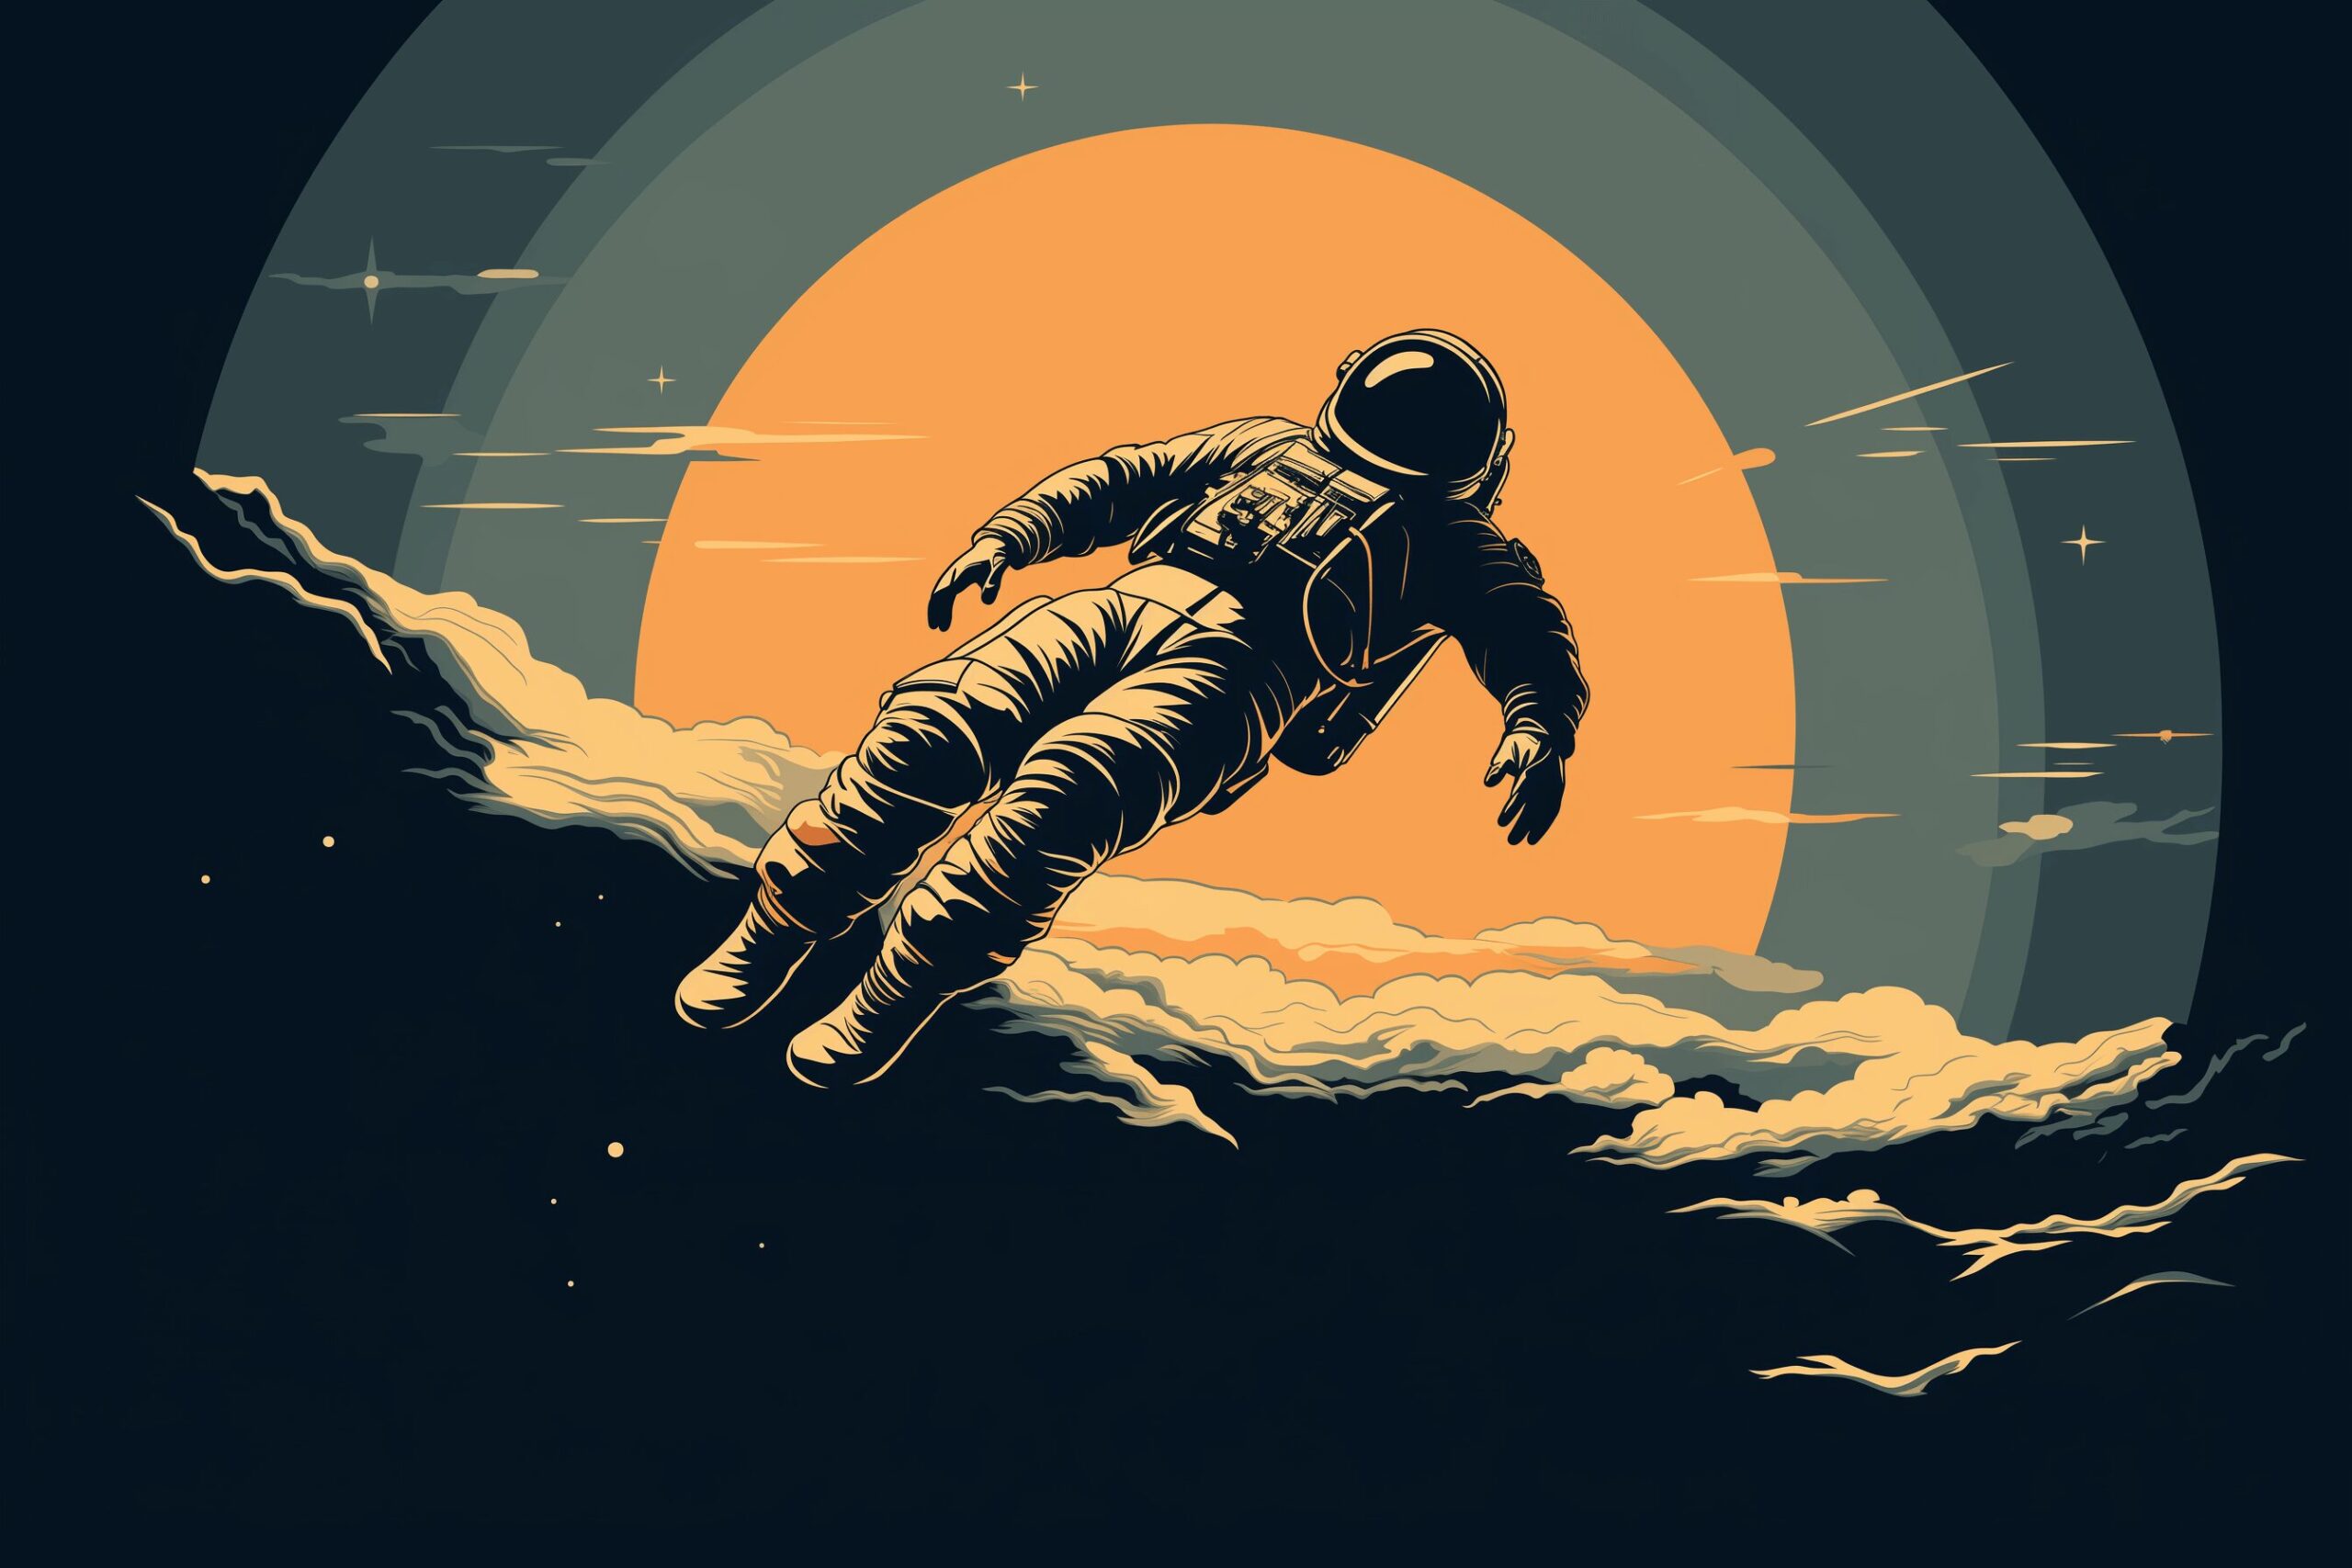 An astronaut floating through space